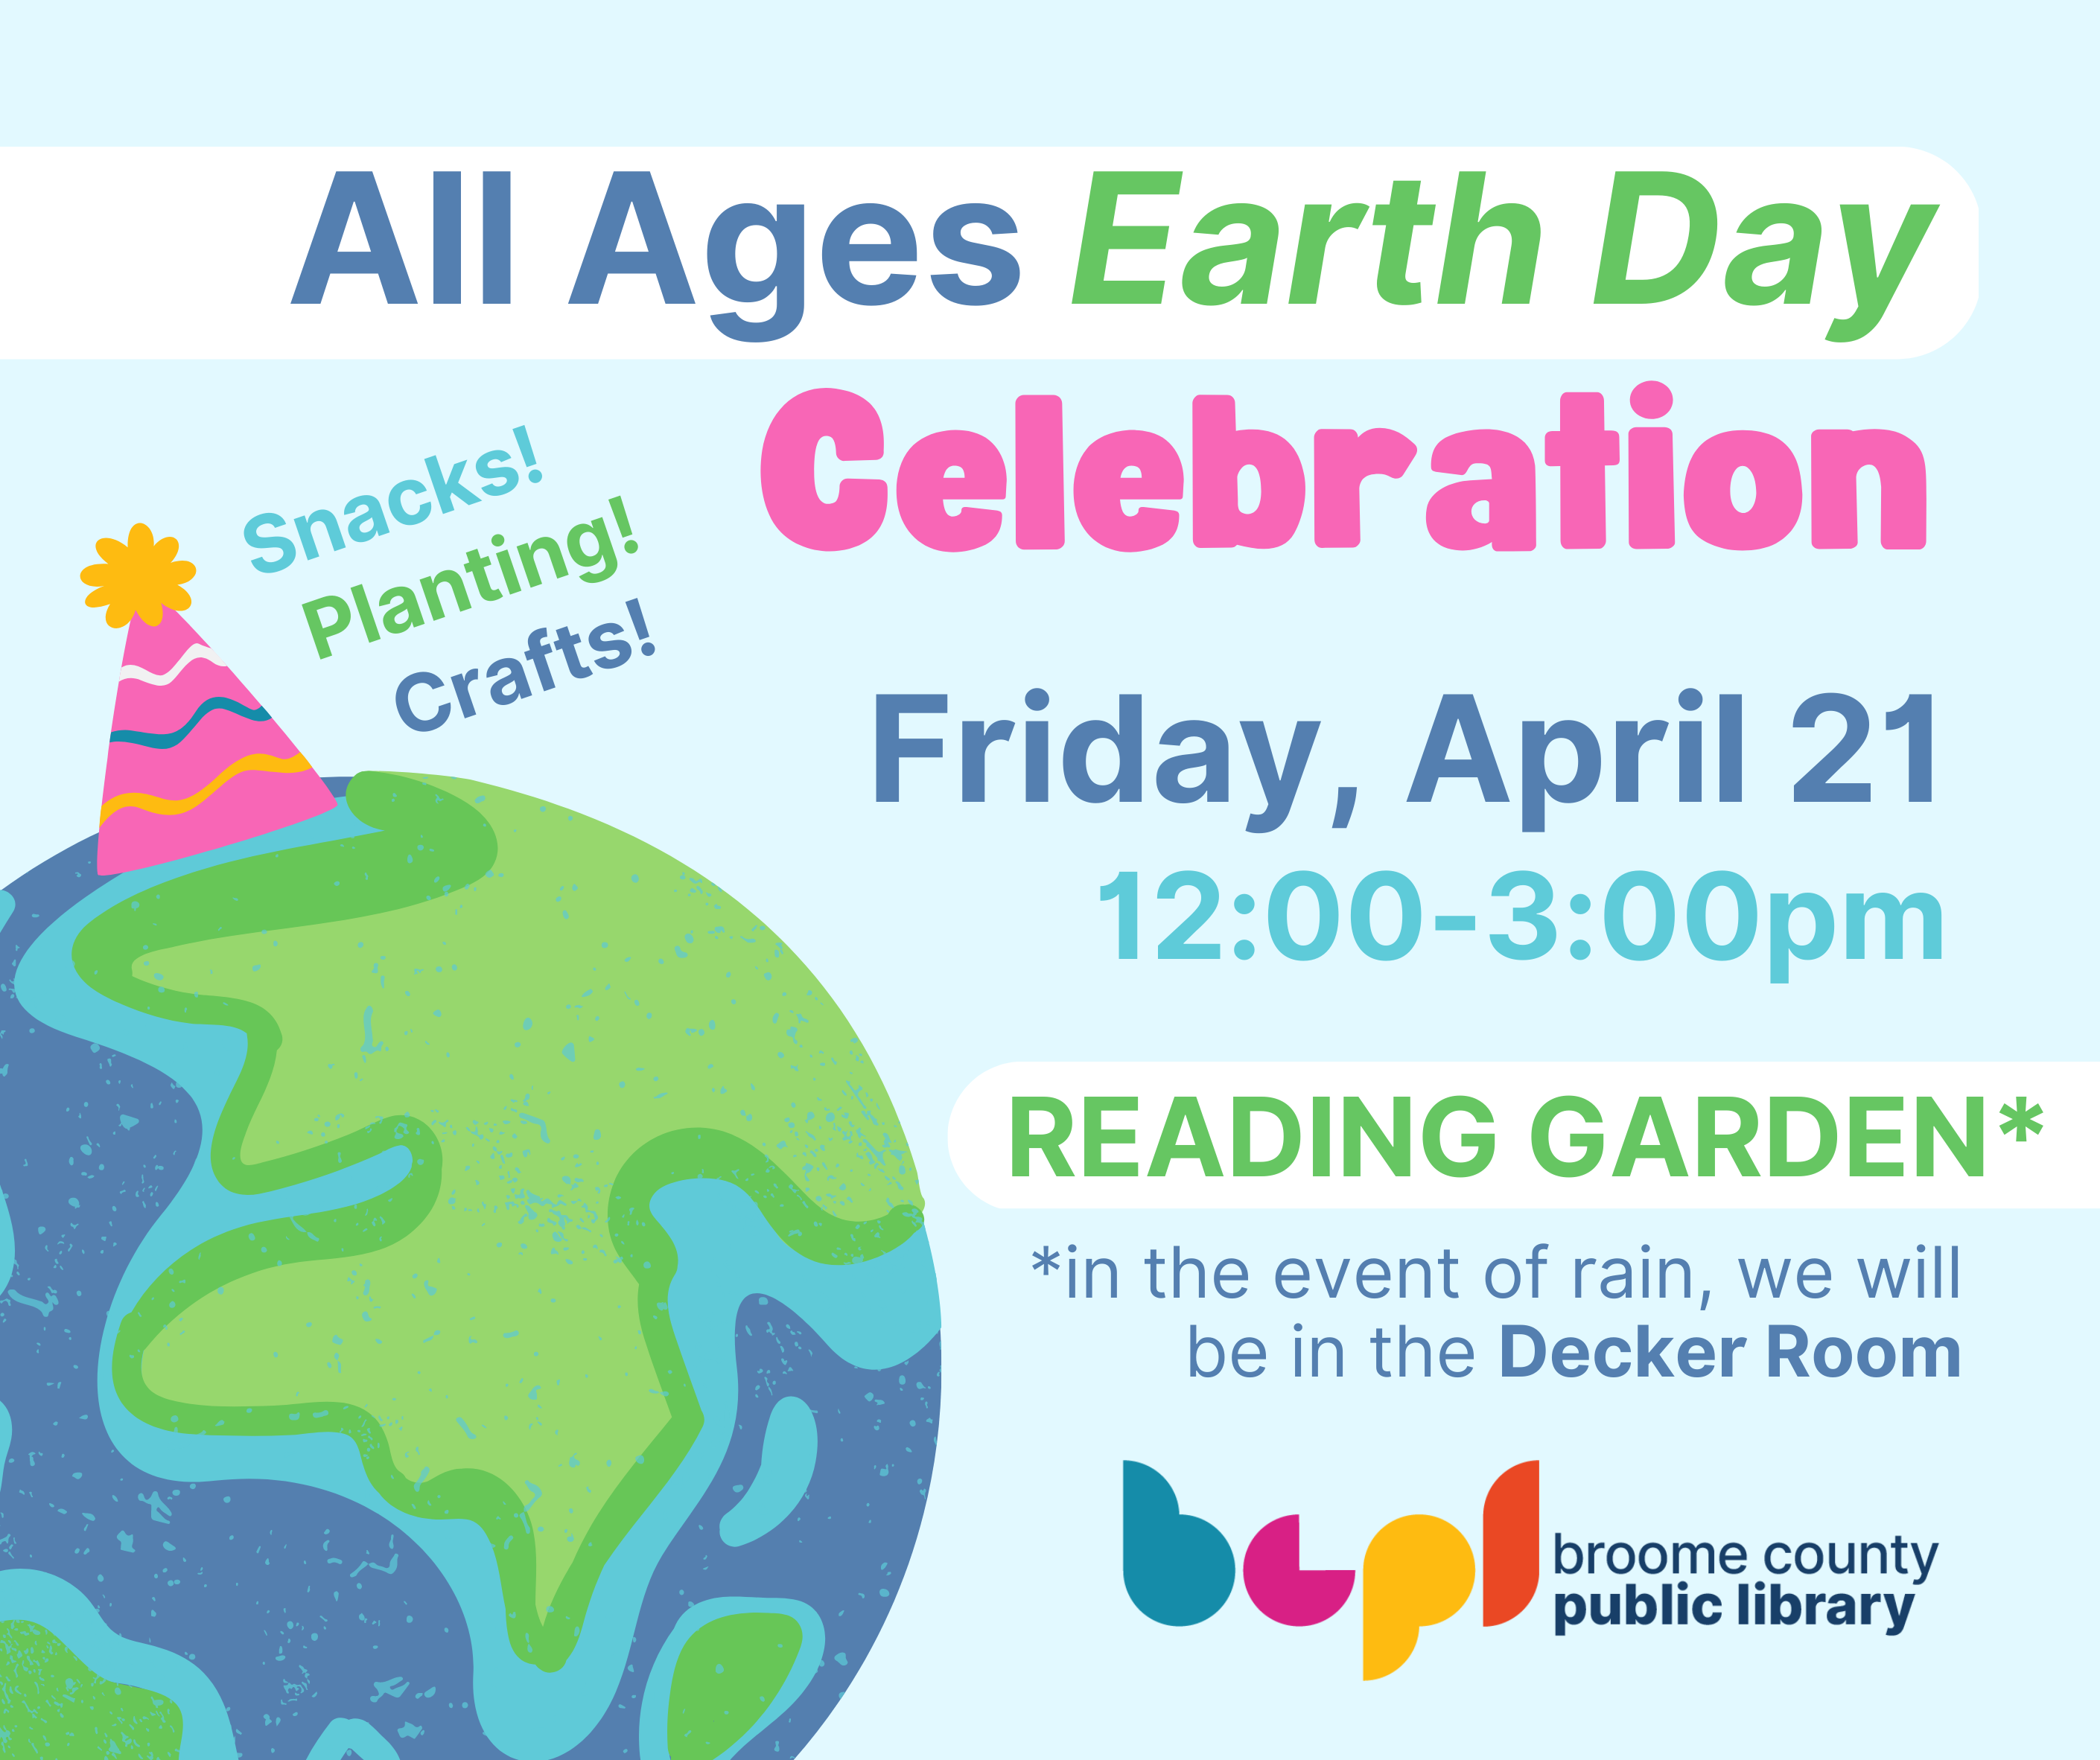 image of the All Ages Earth Day Celebration flyer with a globe wearing a party hat